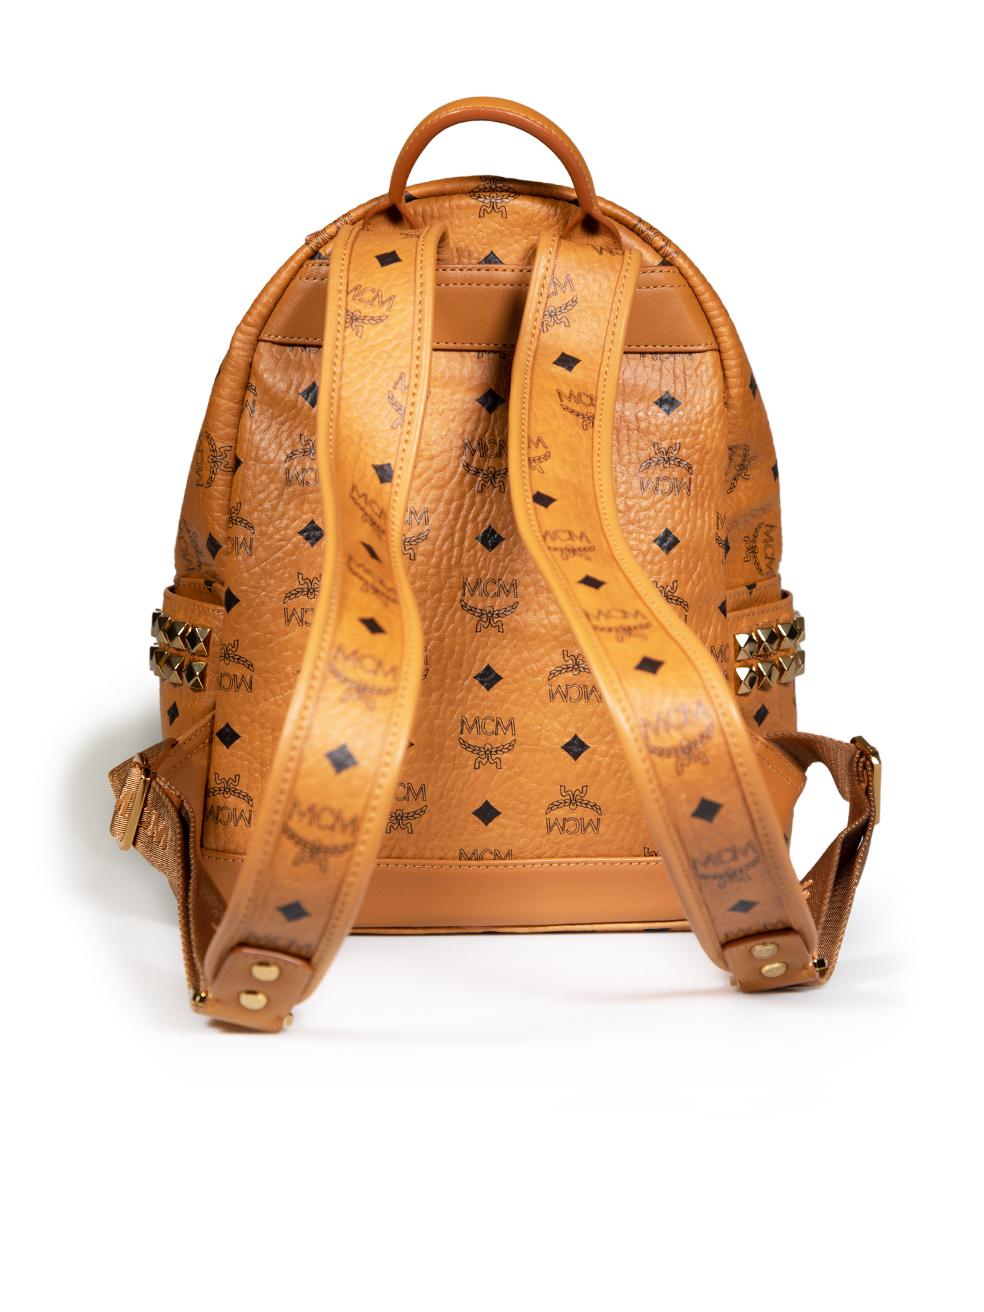 MCM Brown Leather Viseto Stark Side Studded Backpack In Excellent Condition For Sale In London, GB